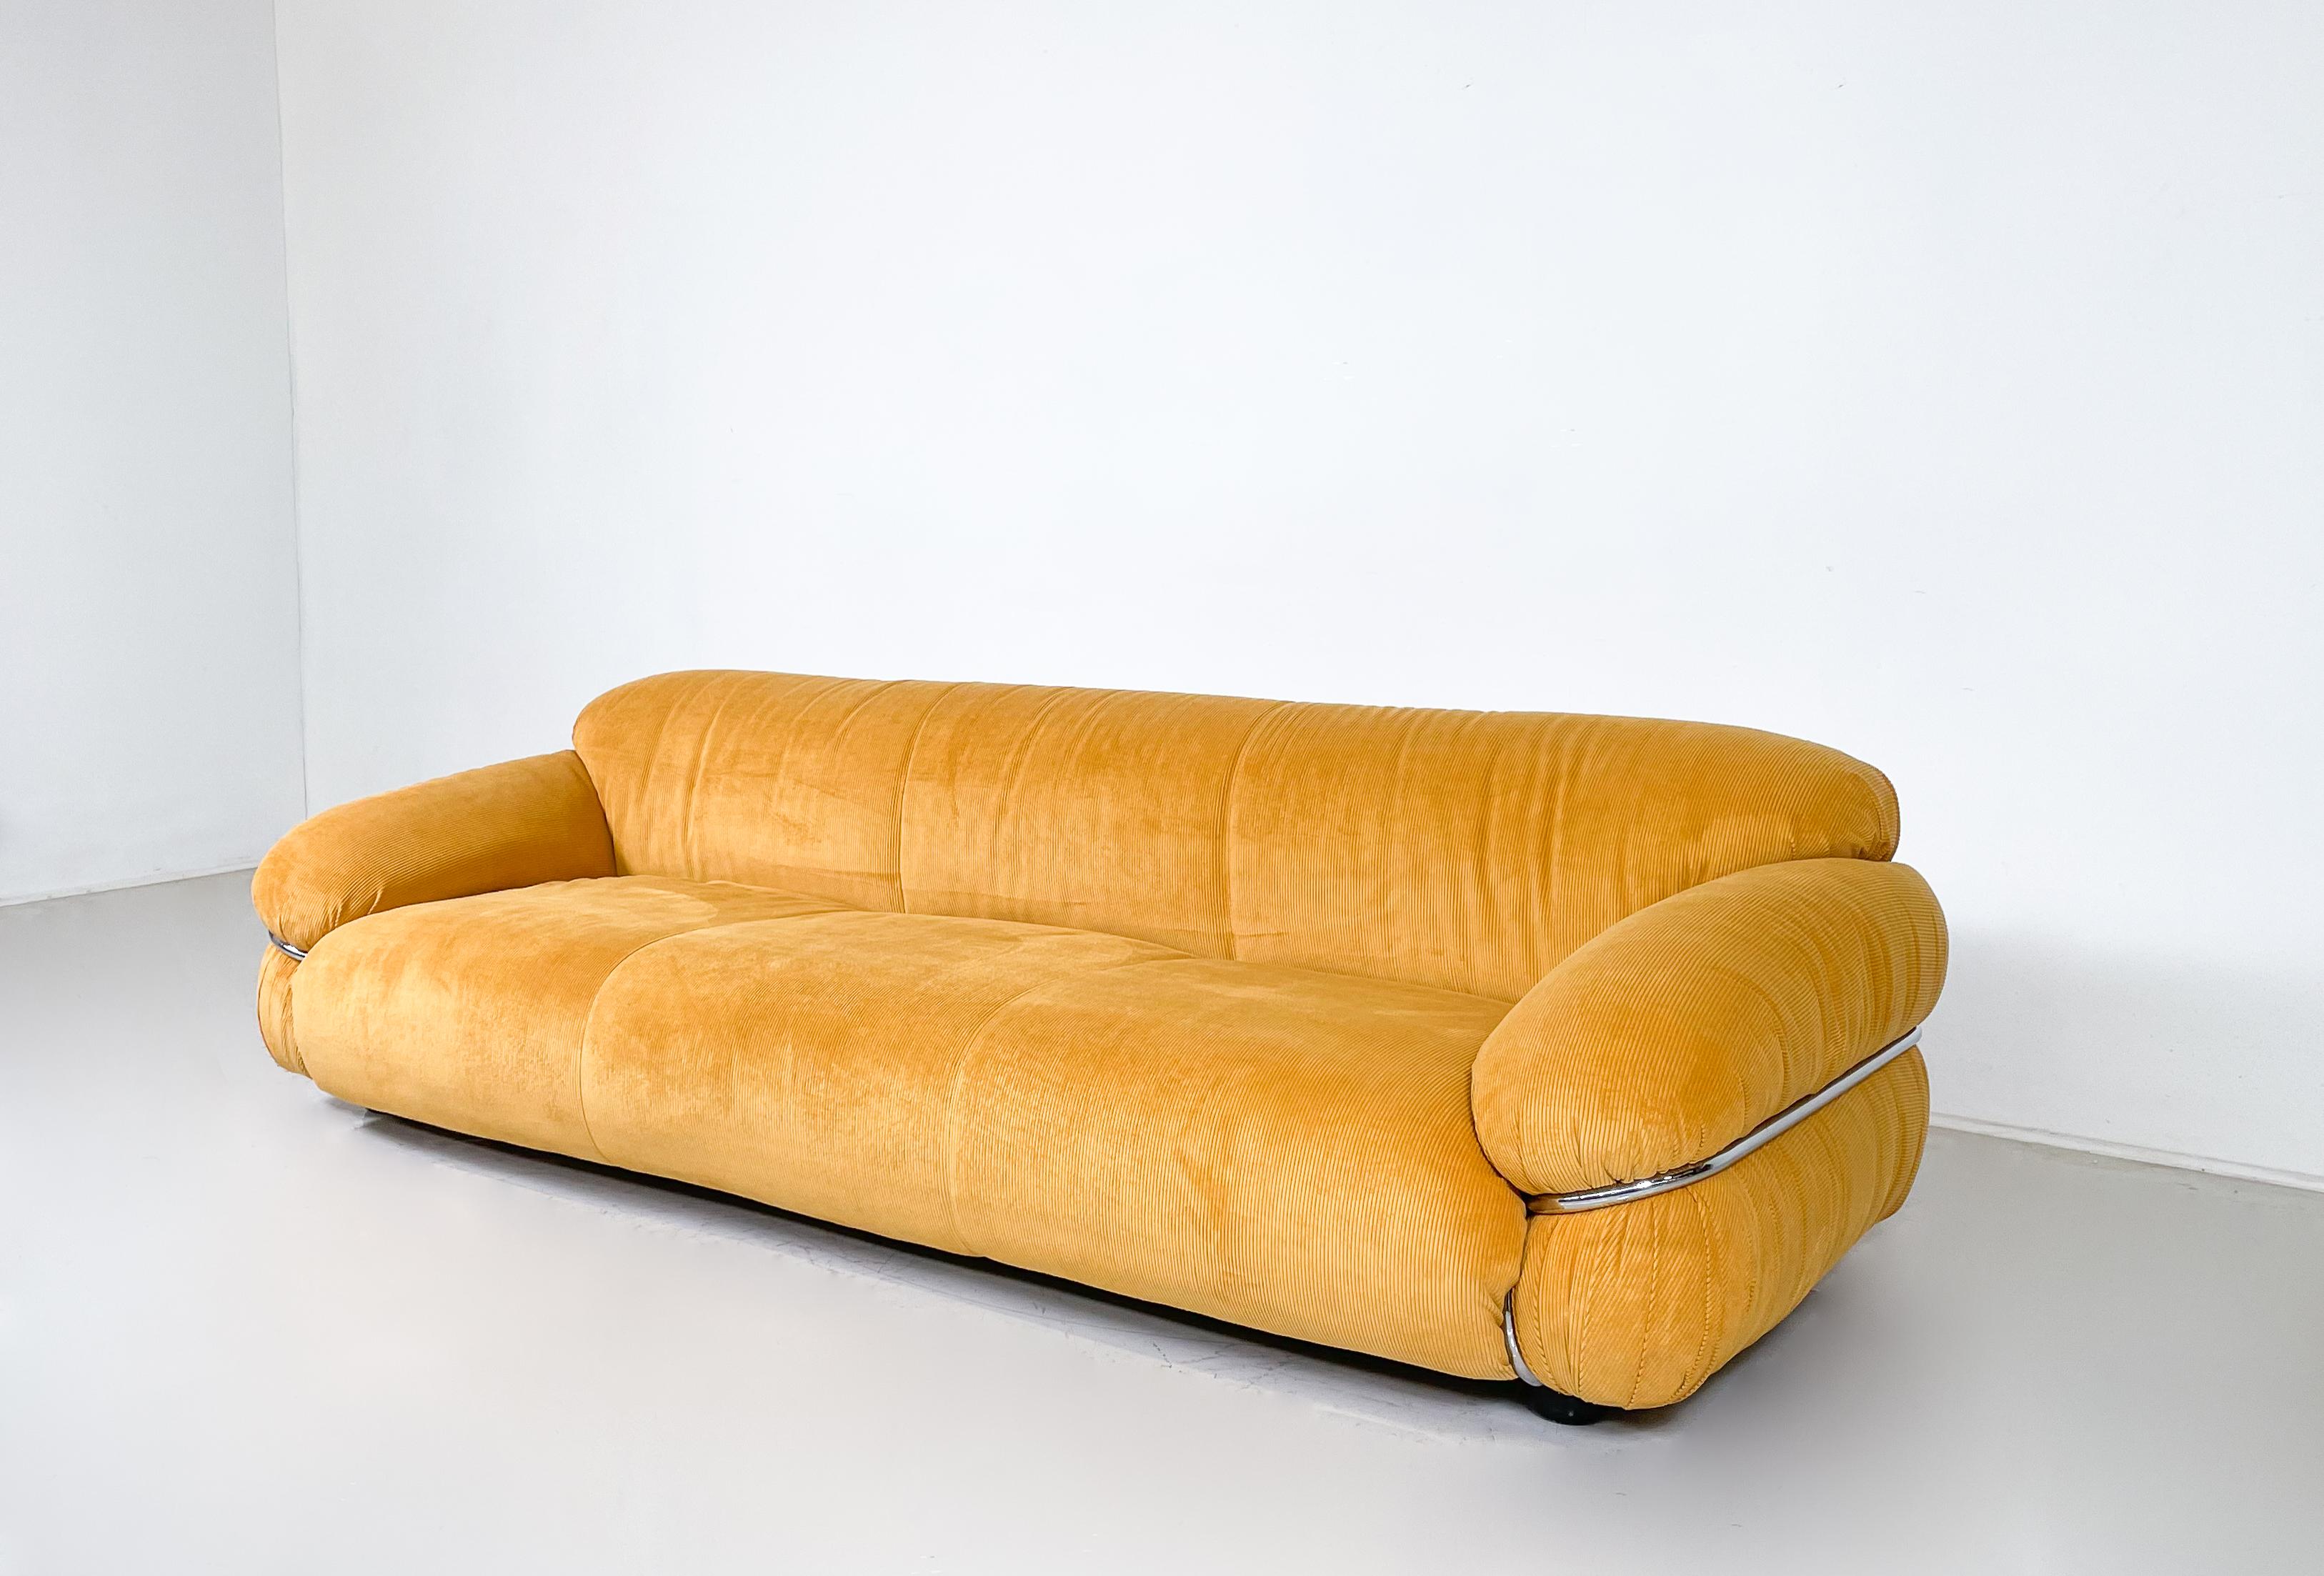 Late 20th Century Three-Seater Sesann Sofa by Gianfranco Frattini for Cassina, Italy, 1970s For Sale